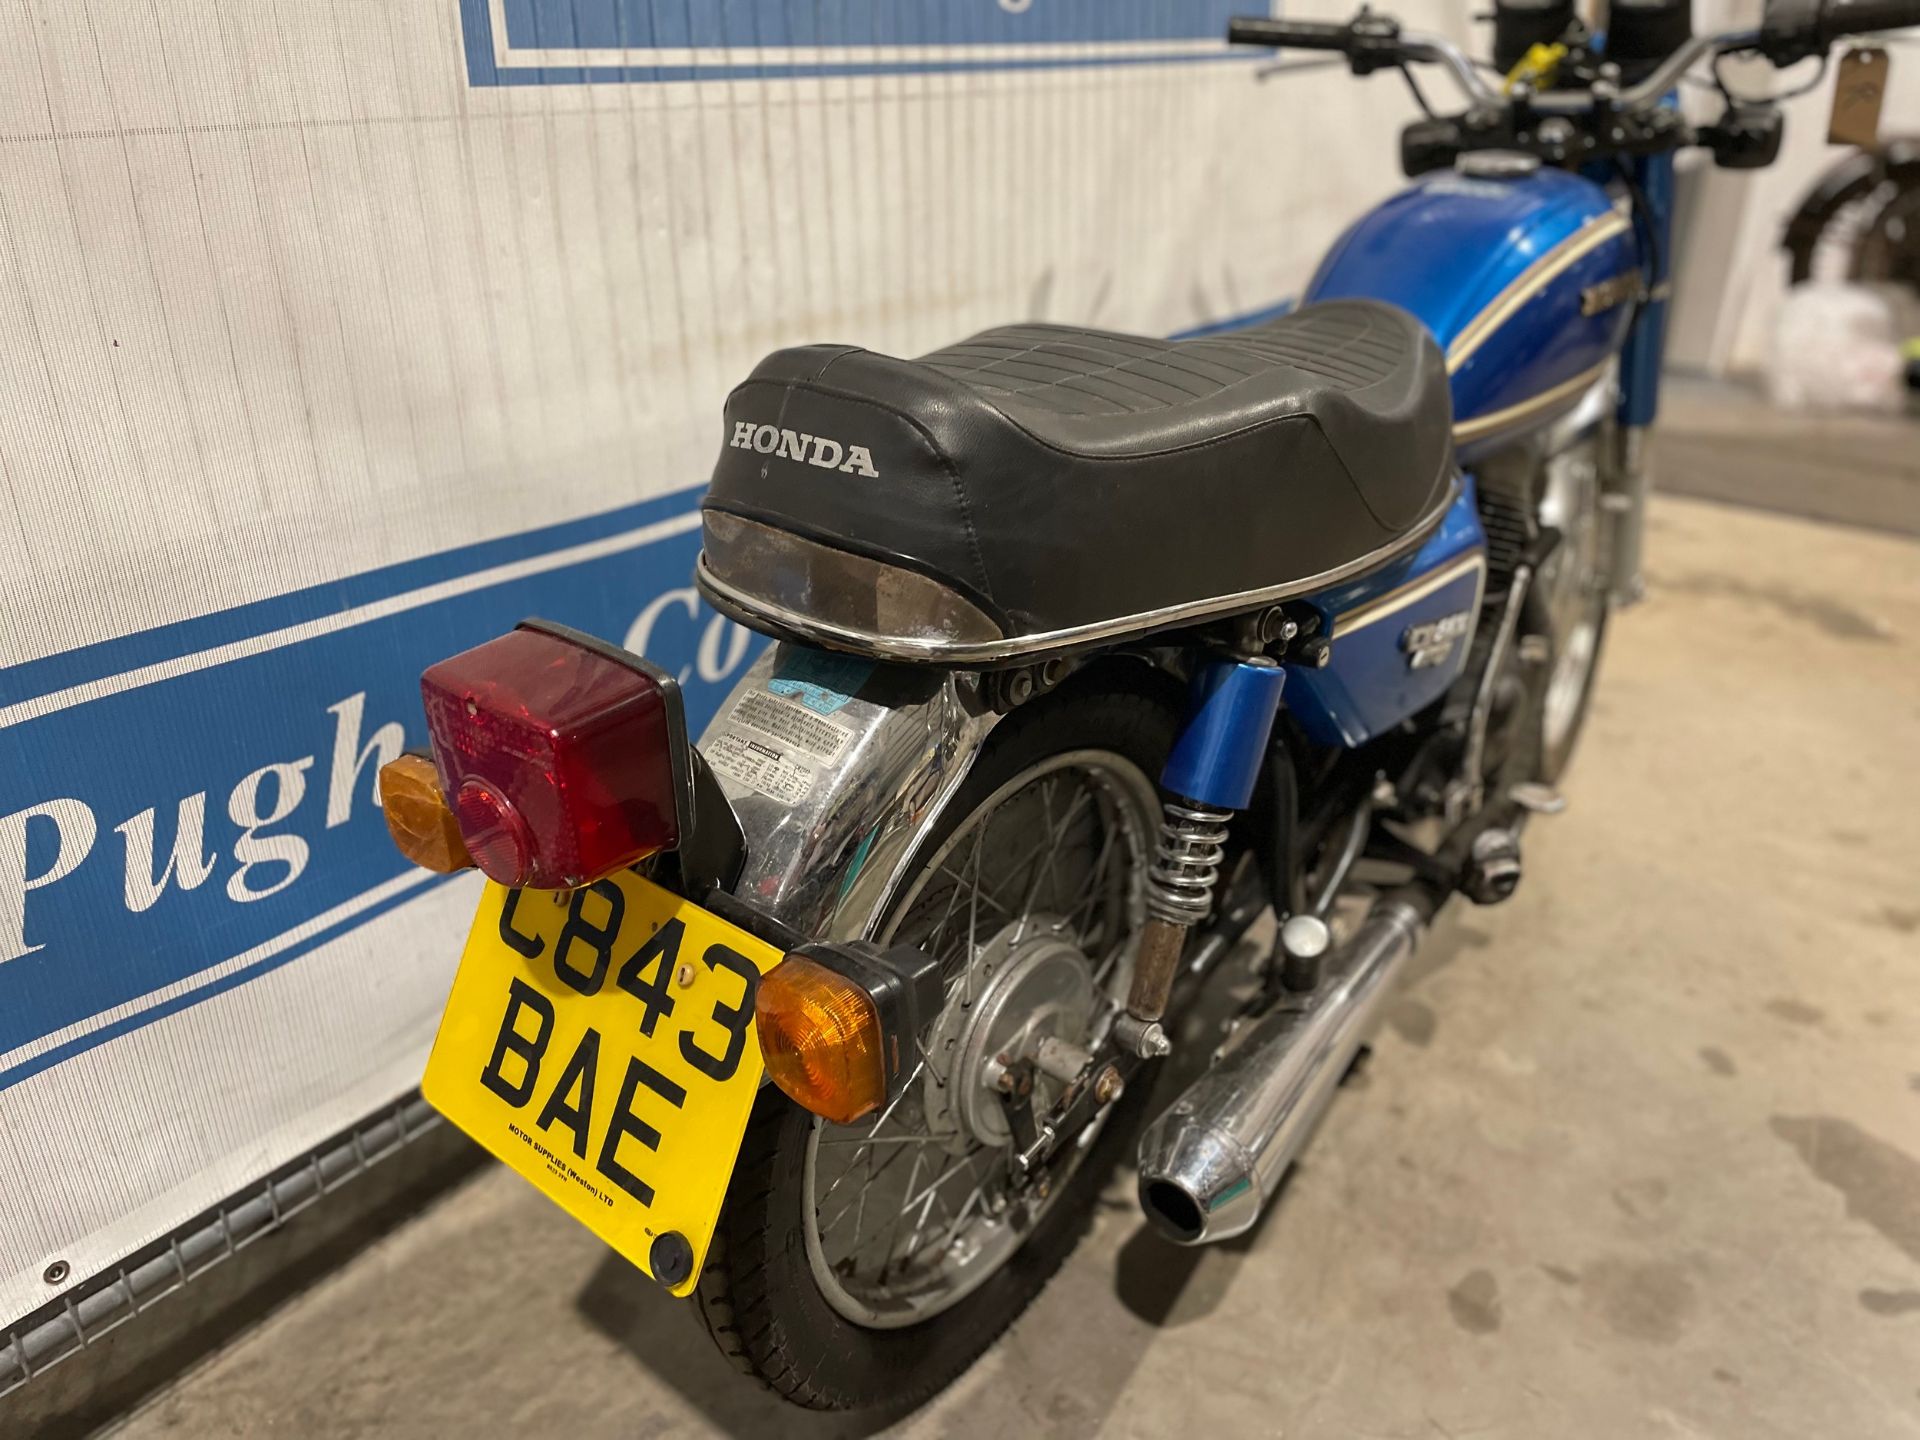 Honda CD200 motorcycle. 1986. Being sold due to illness. c/w Old MOTs and service books. Reg C843 - Image 10 of 10